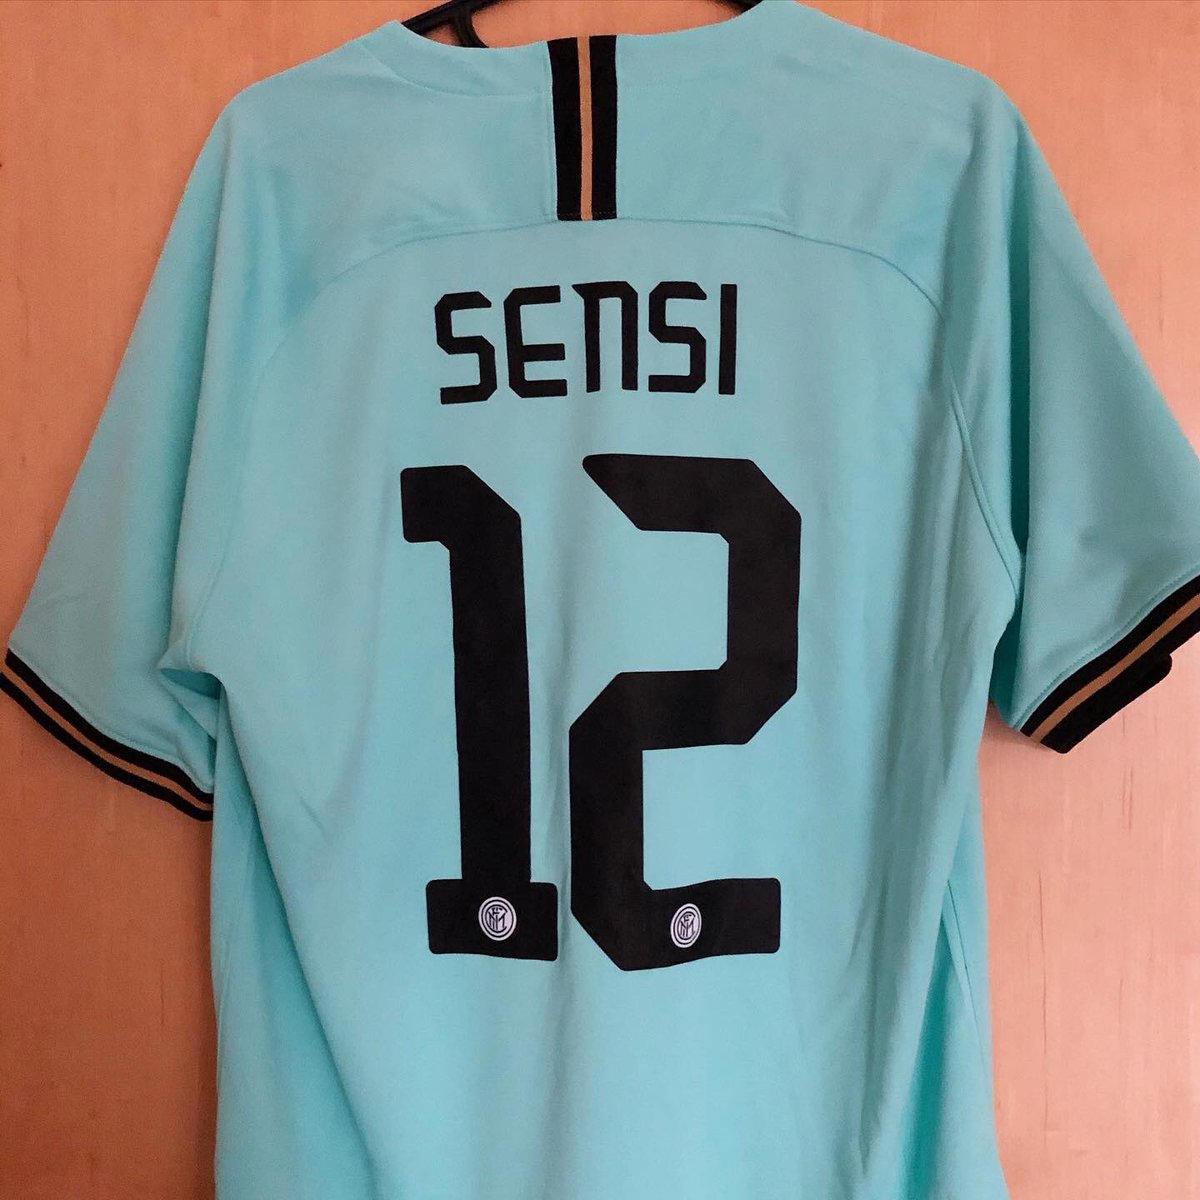  @InterAway Kit, 2019/20NikePersonalised:  @stefanosensi12 It’s an in-or-out kind of night for Inter in the UCL. We need something for good luck. Today’s choice is a stunner, Inter’s best shirt of the past few seasons, a wonderful gift from my friends Gianni and Giulia